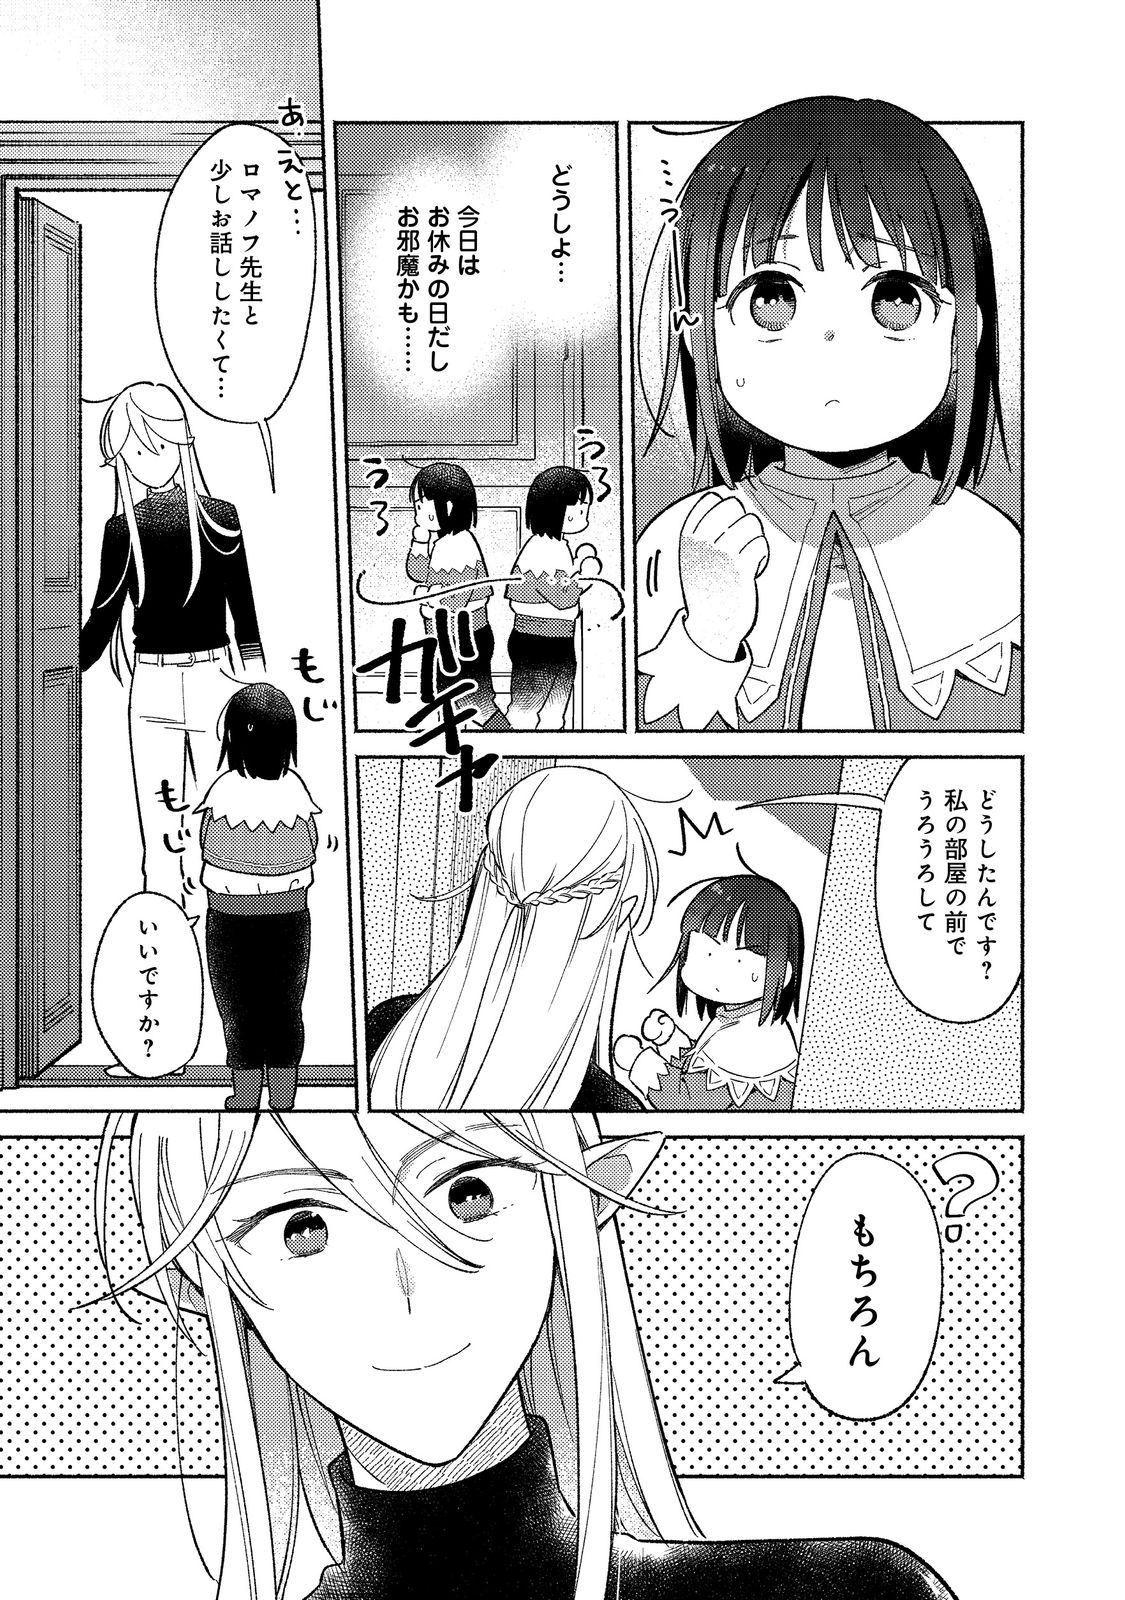 I’m the White Pig Nobleman 第16.1話 - Page 10